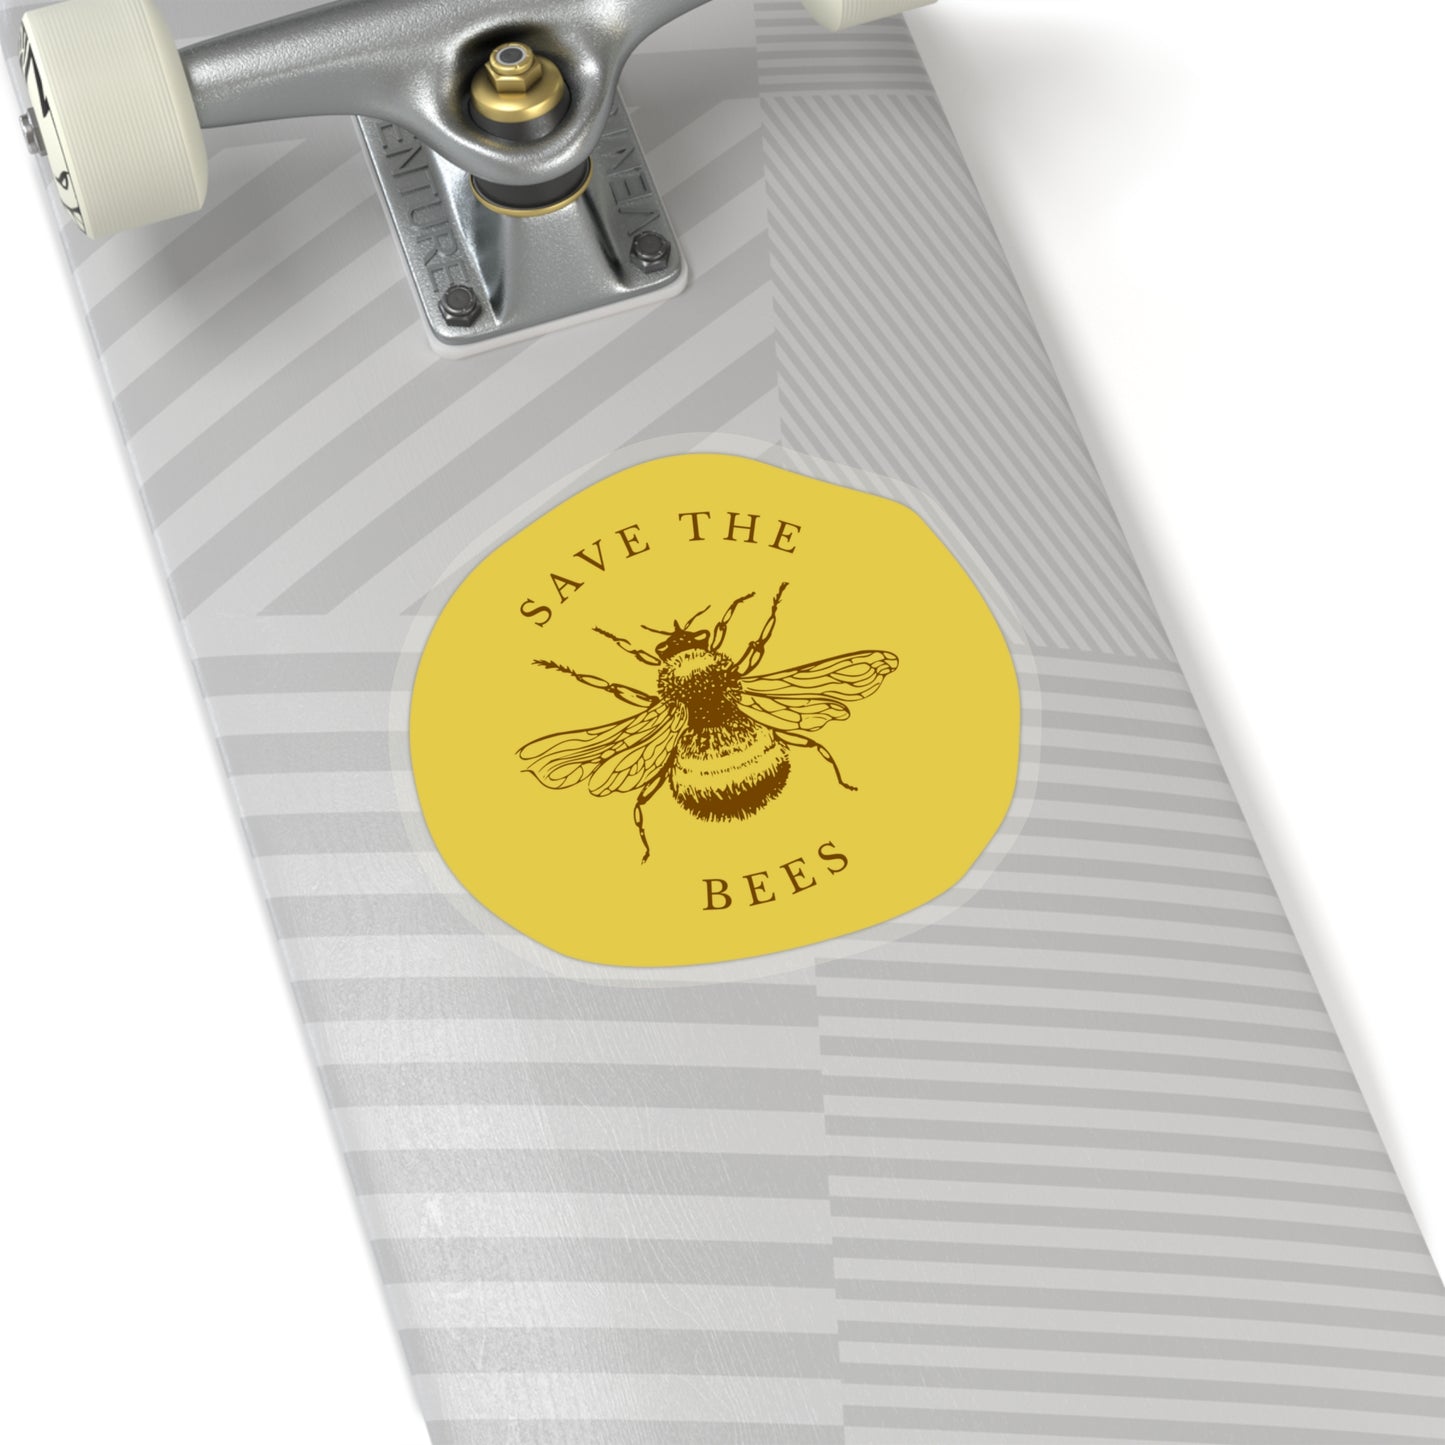 Save The Bees Stickers